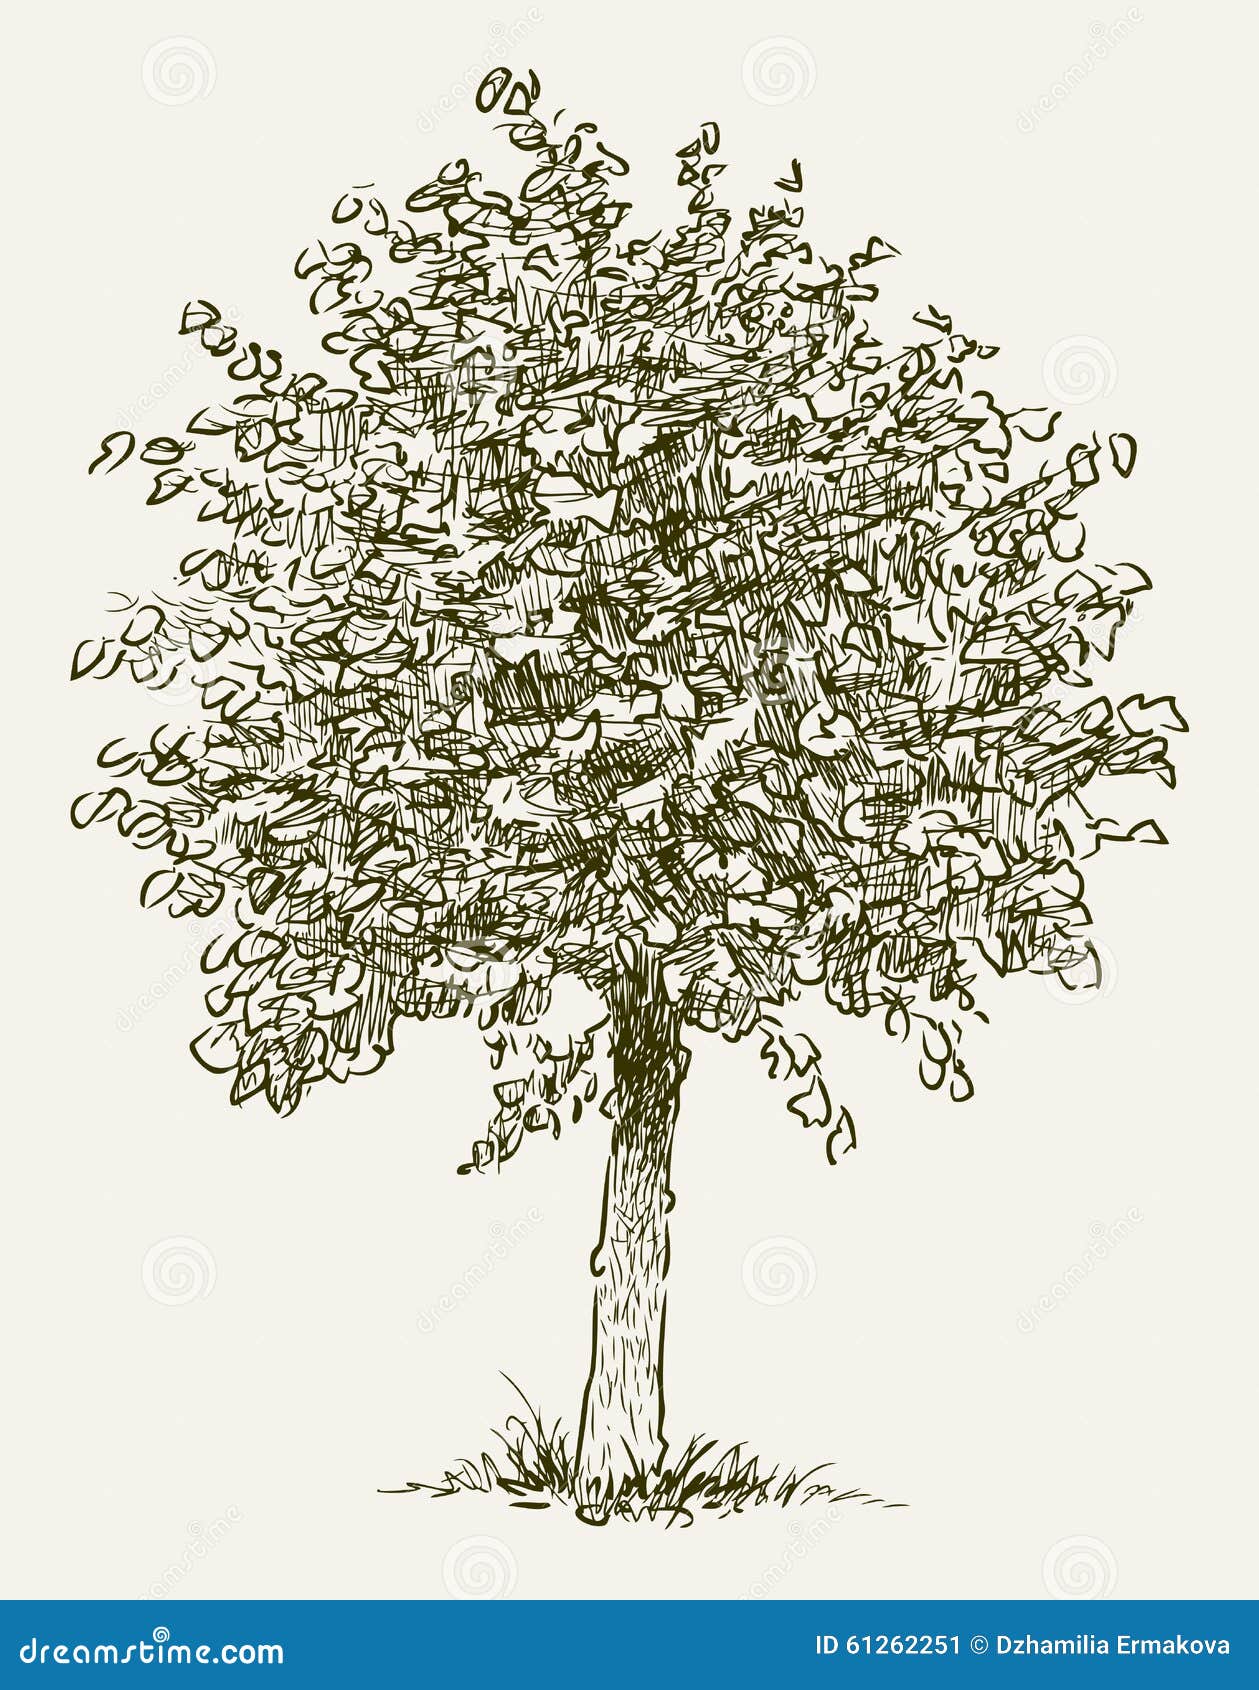 49,237 Small Tree Drawing Images, Stock Photos, 3D objects, & Vectors |  Shutterstock